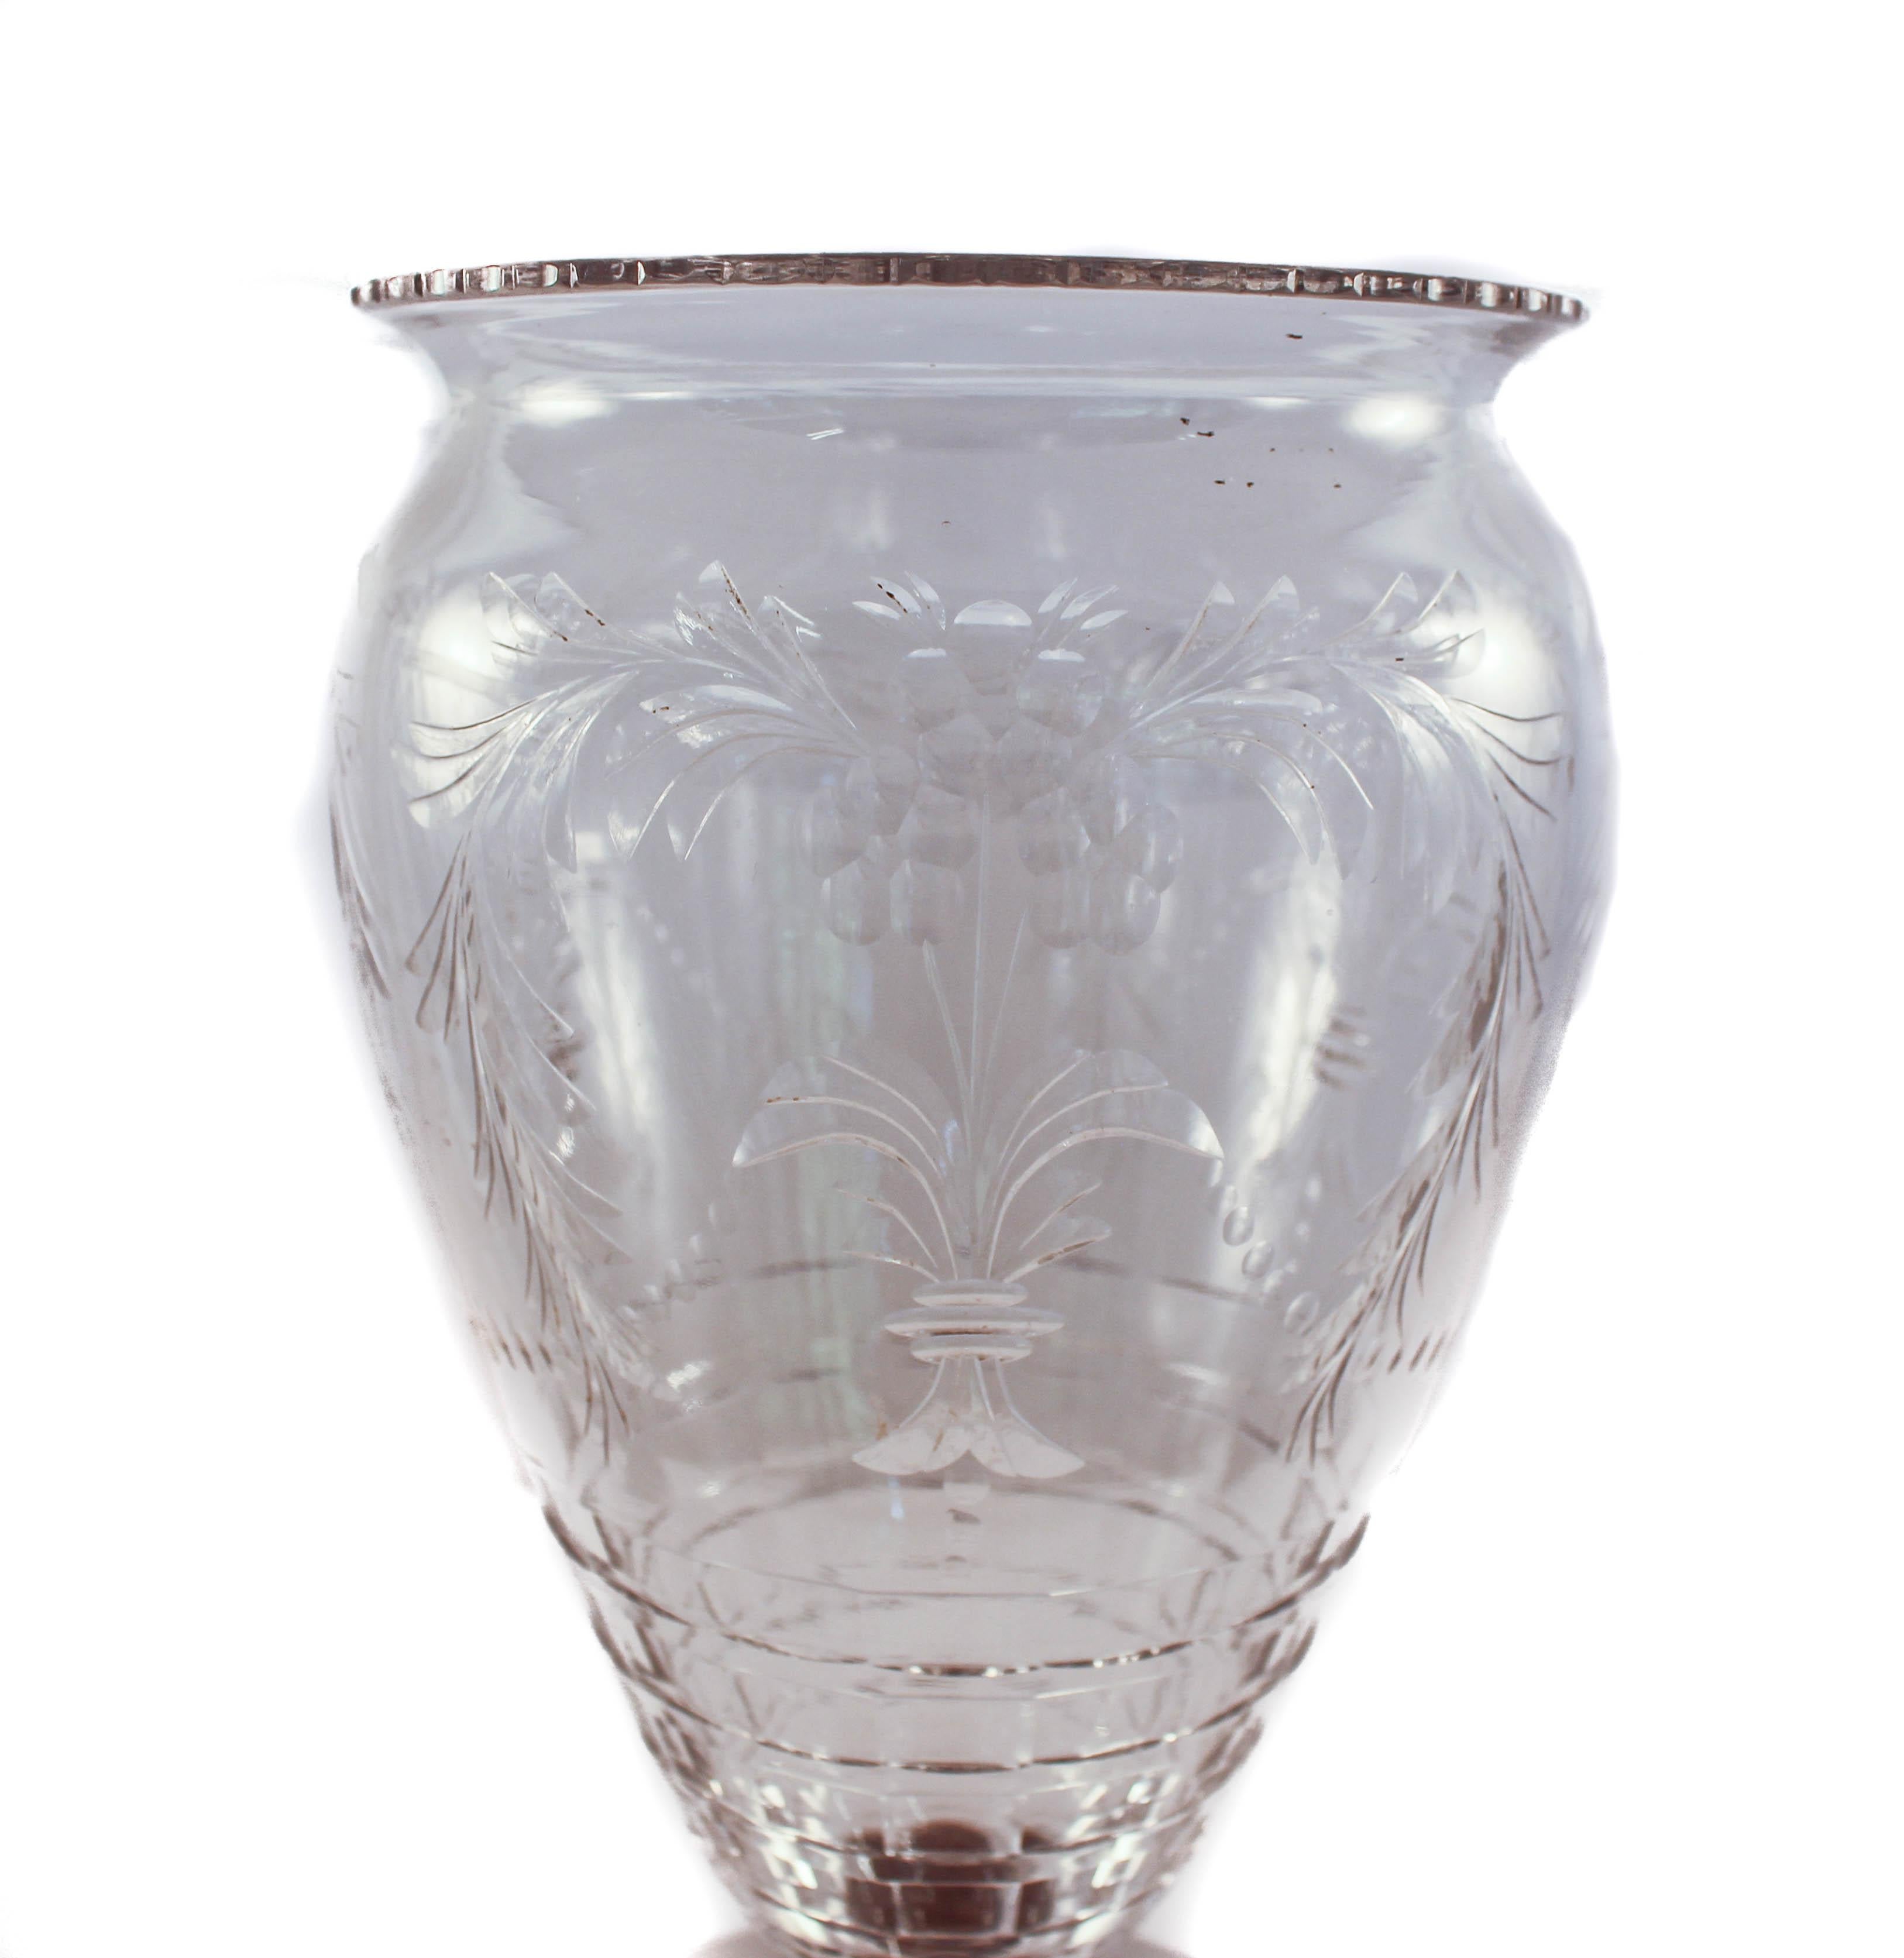 We are proud to offer this sterling and crystal vase by the Hawkes Glass Company of Corning, NY.
Based in Corning, NY, T.G. Hawkes & Co. (circa 1880-1959) was established by Thomas Gibbons Hawkes (1846-1913). Born in Ireland, Hawkes immigrated to